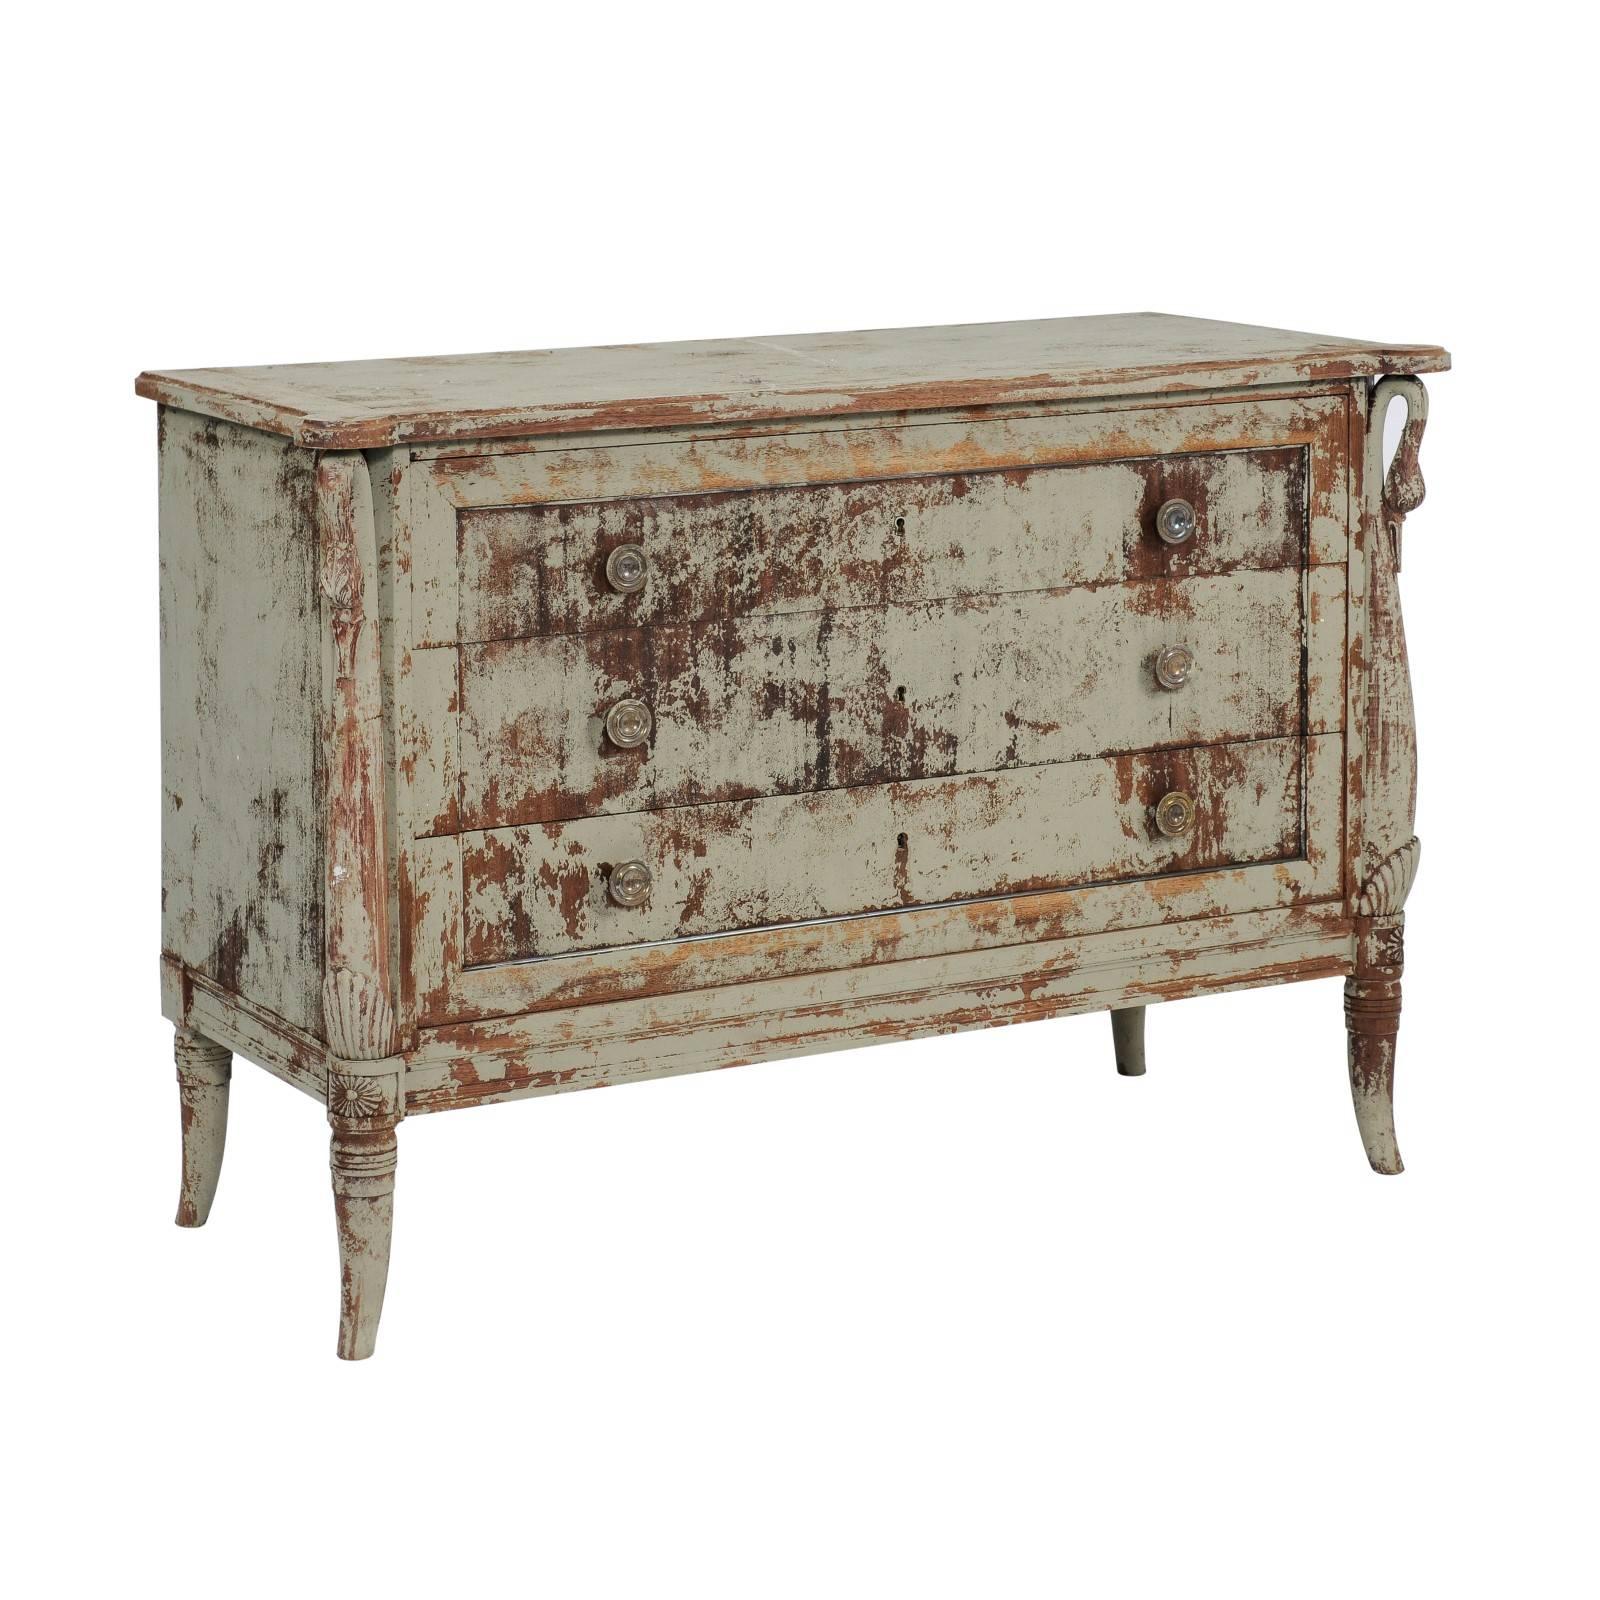 Art Nouveau Style French Painted Three-Drawer Commode with Swan Motifs For Sale